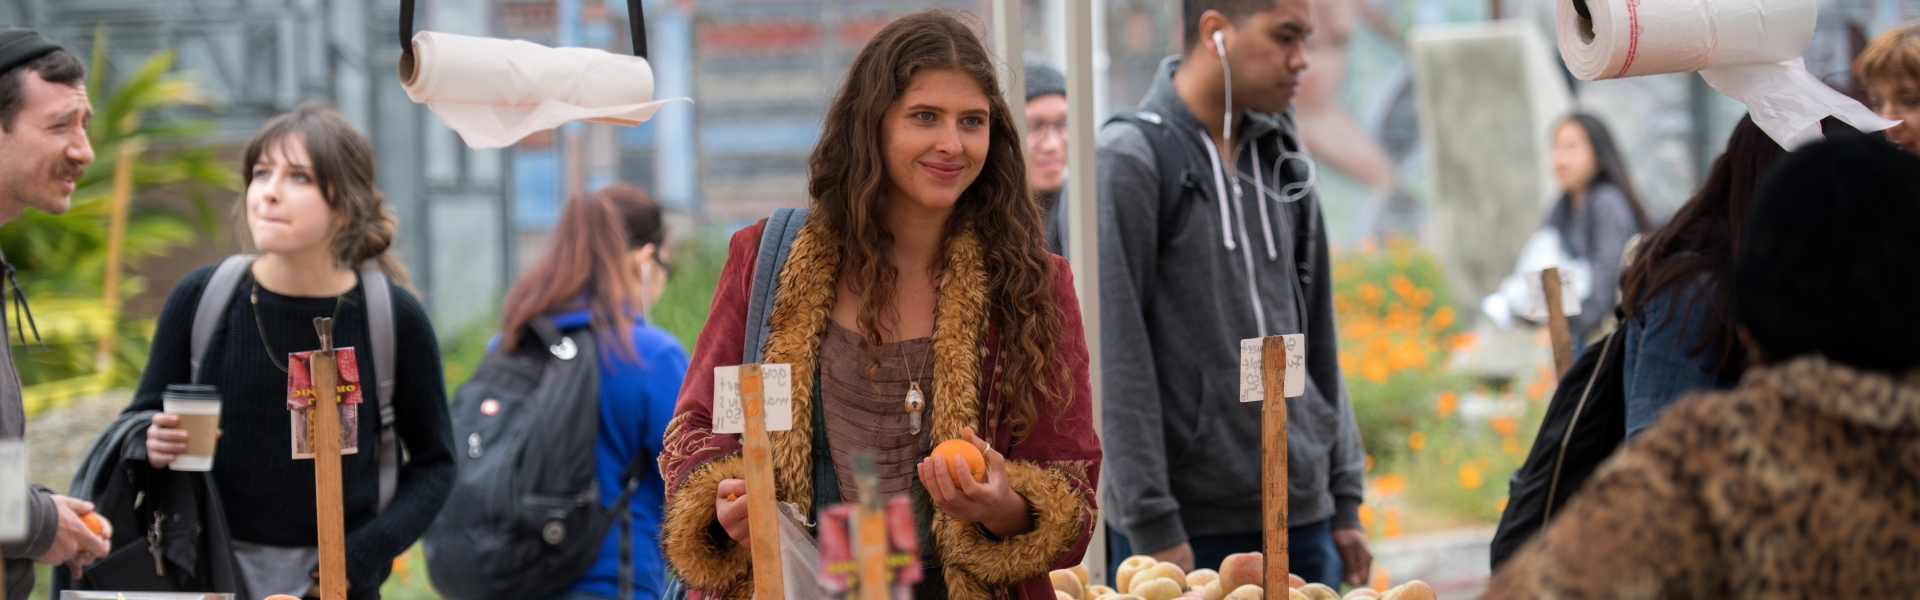 a student shopping at the farmers market.